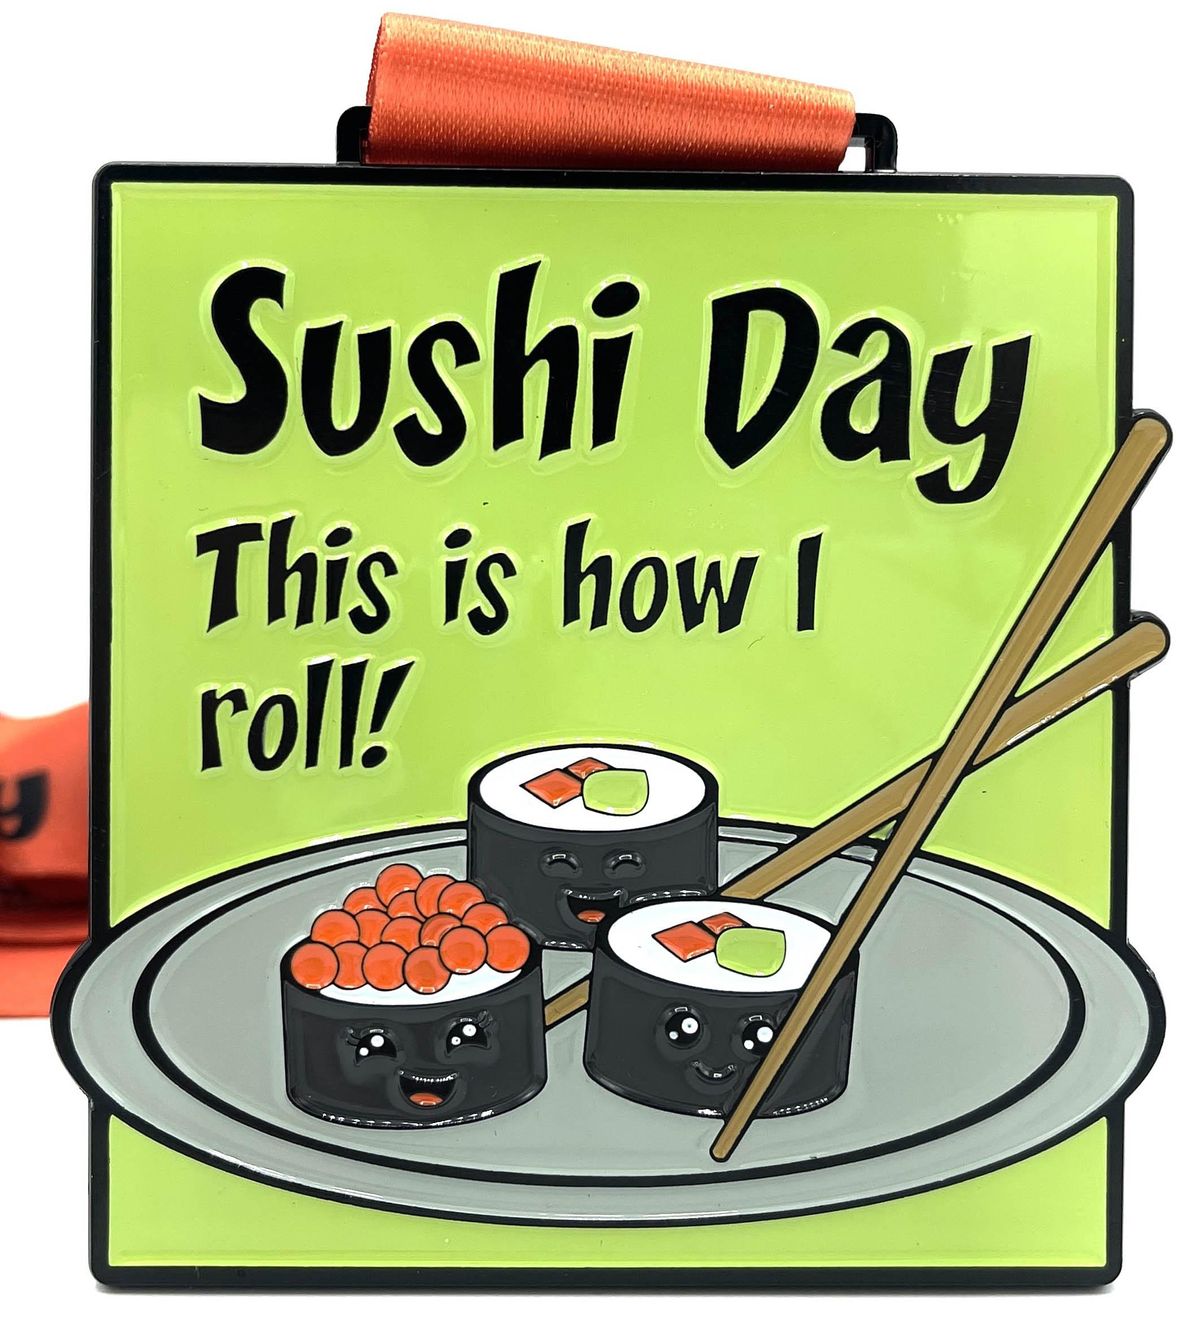 2021 Sushi Day 1M 5K 10K 13.1 26.2-Participate from Home. Save $5!